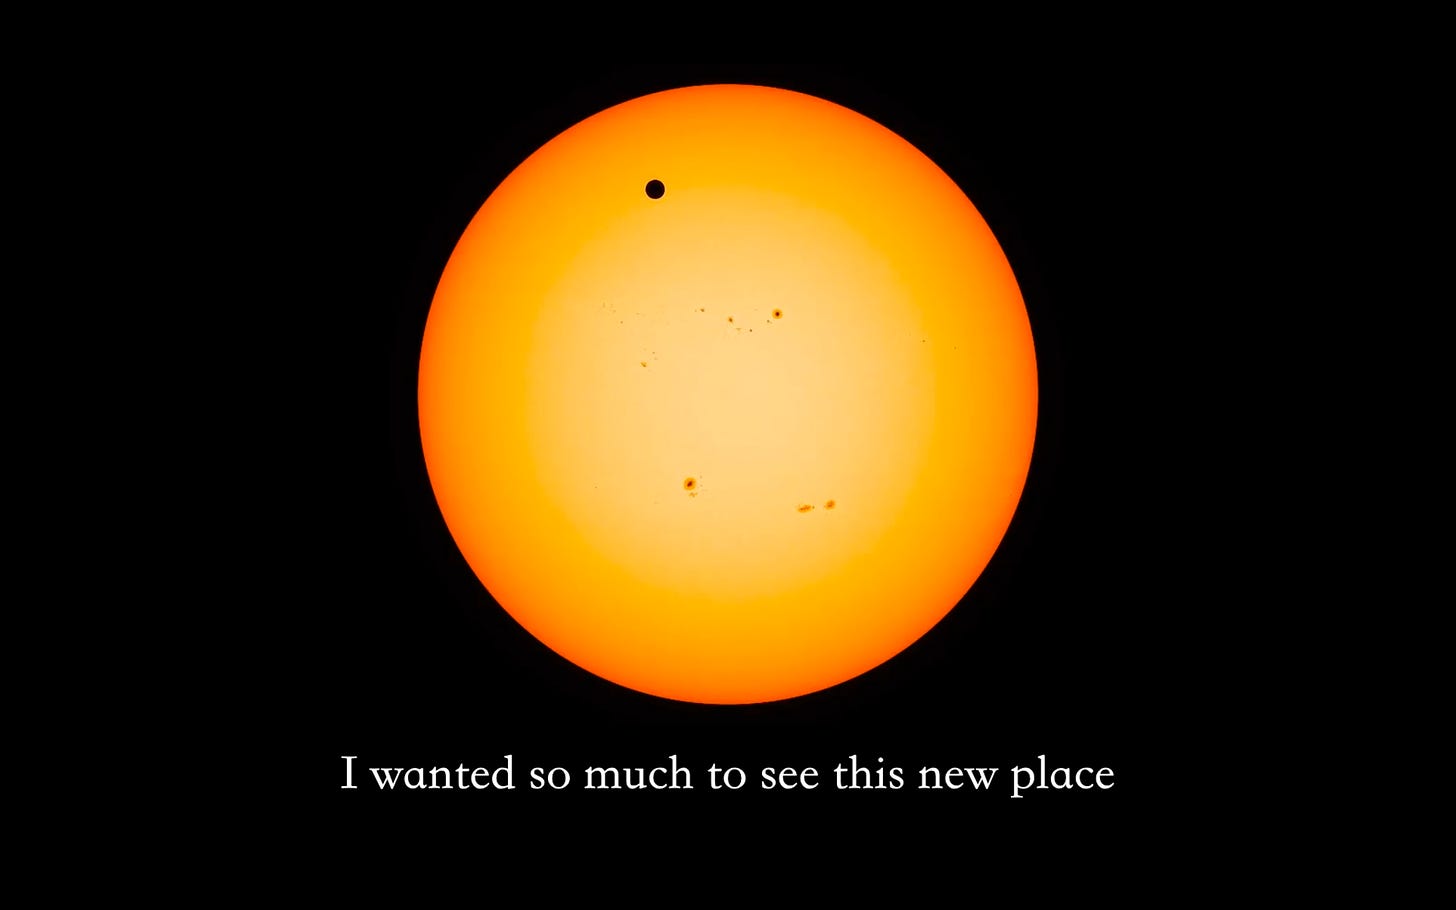 still showing a black dot, Venus, on the face of the sun. below are subtitles that read, "I wanted so much to see this new place"